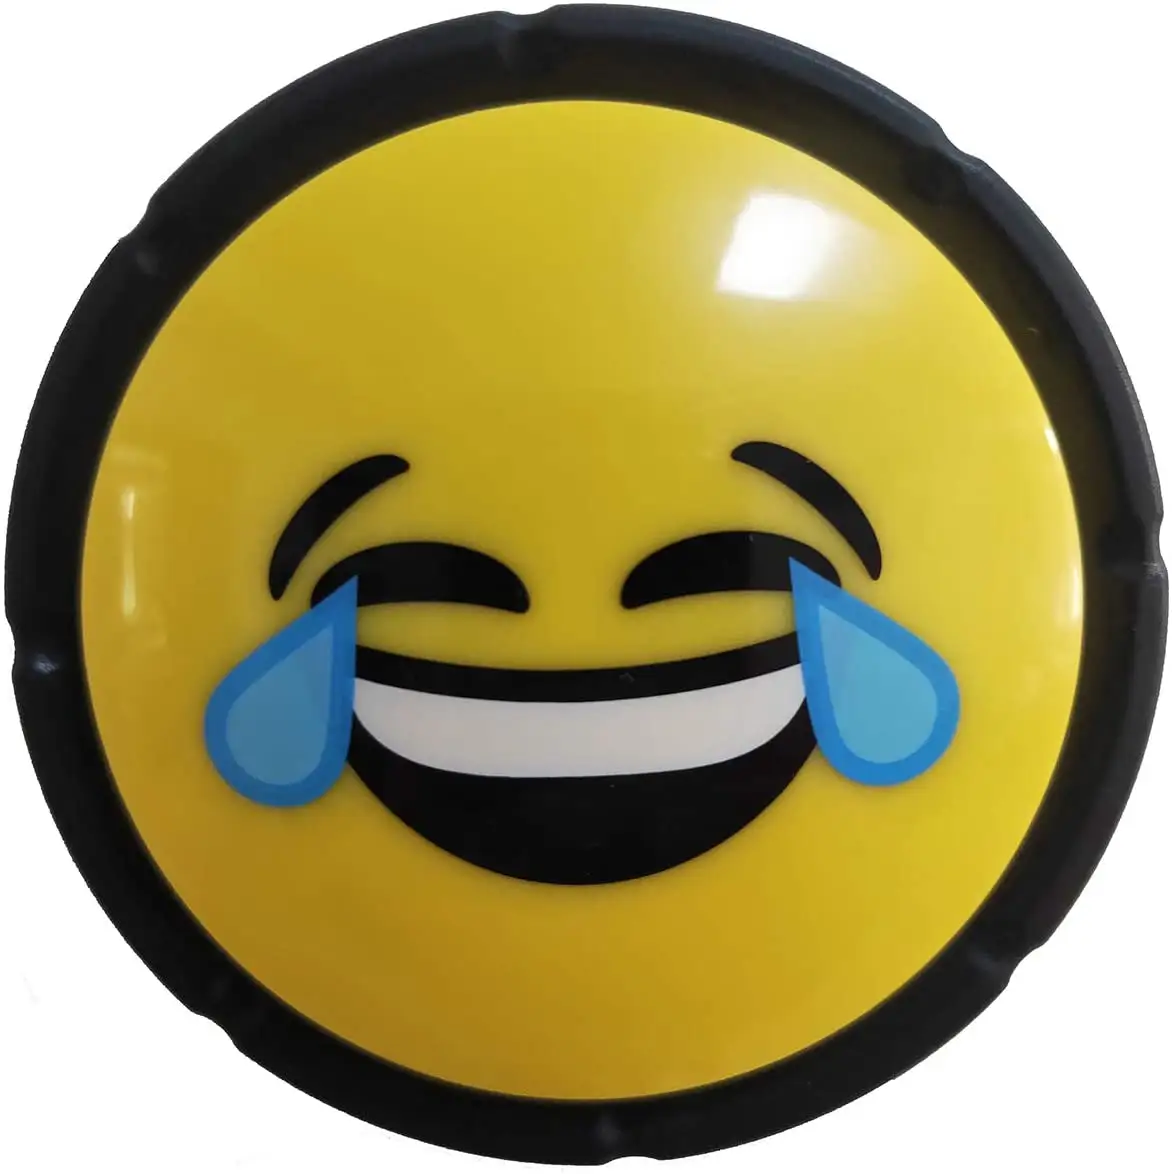 30 Second digital funny emoticon voice recorder sound button for gift